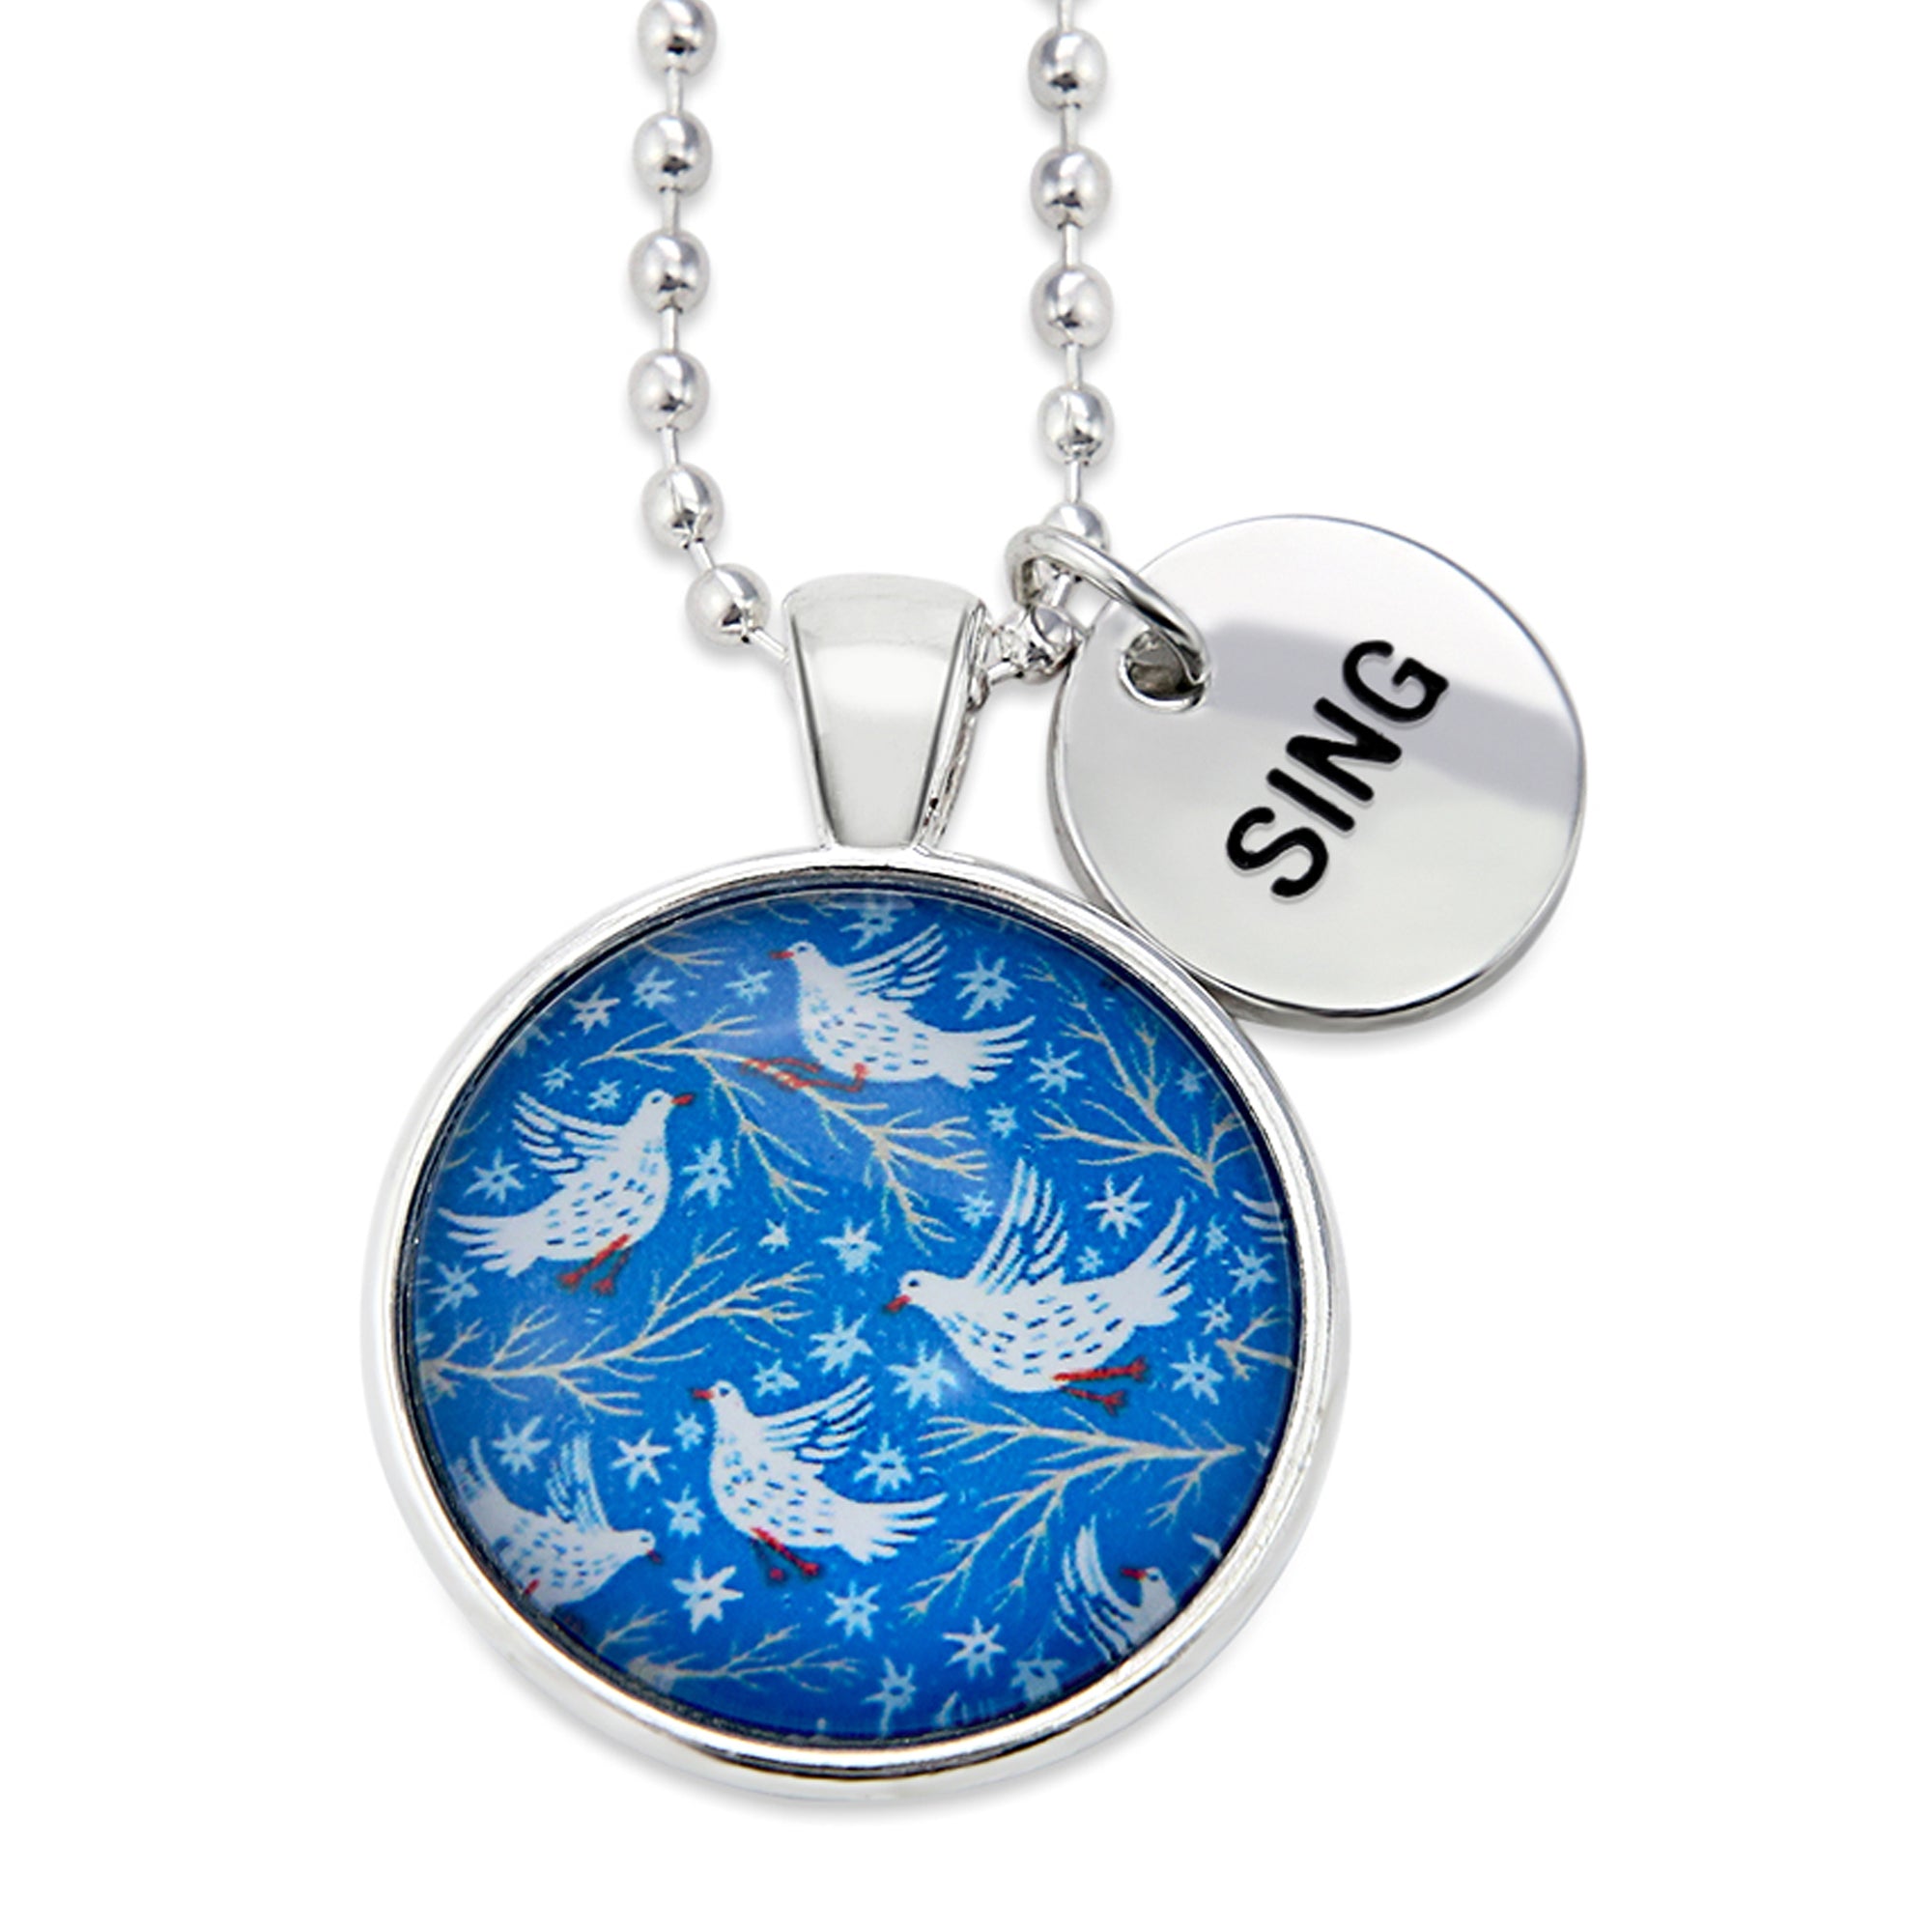 Blue Collection - Bright Silver 'SING' Necklace - Snow Birds (10263)